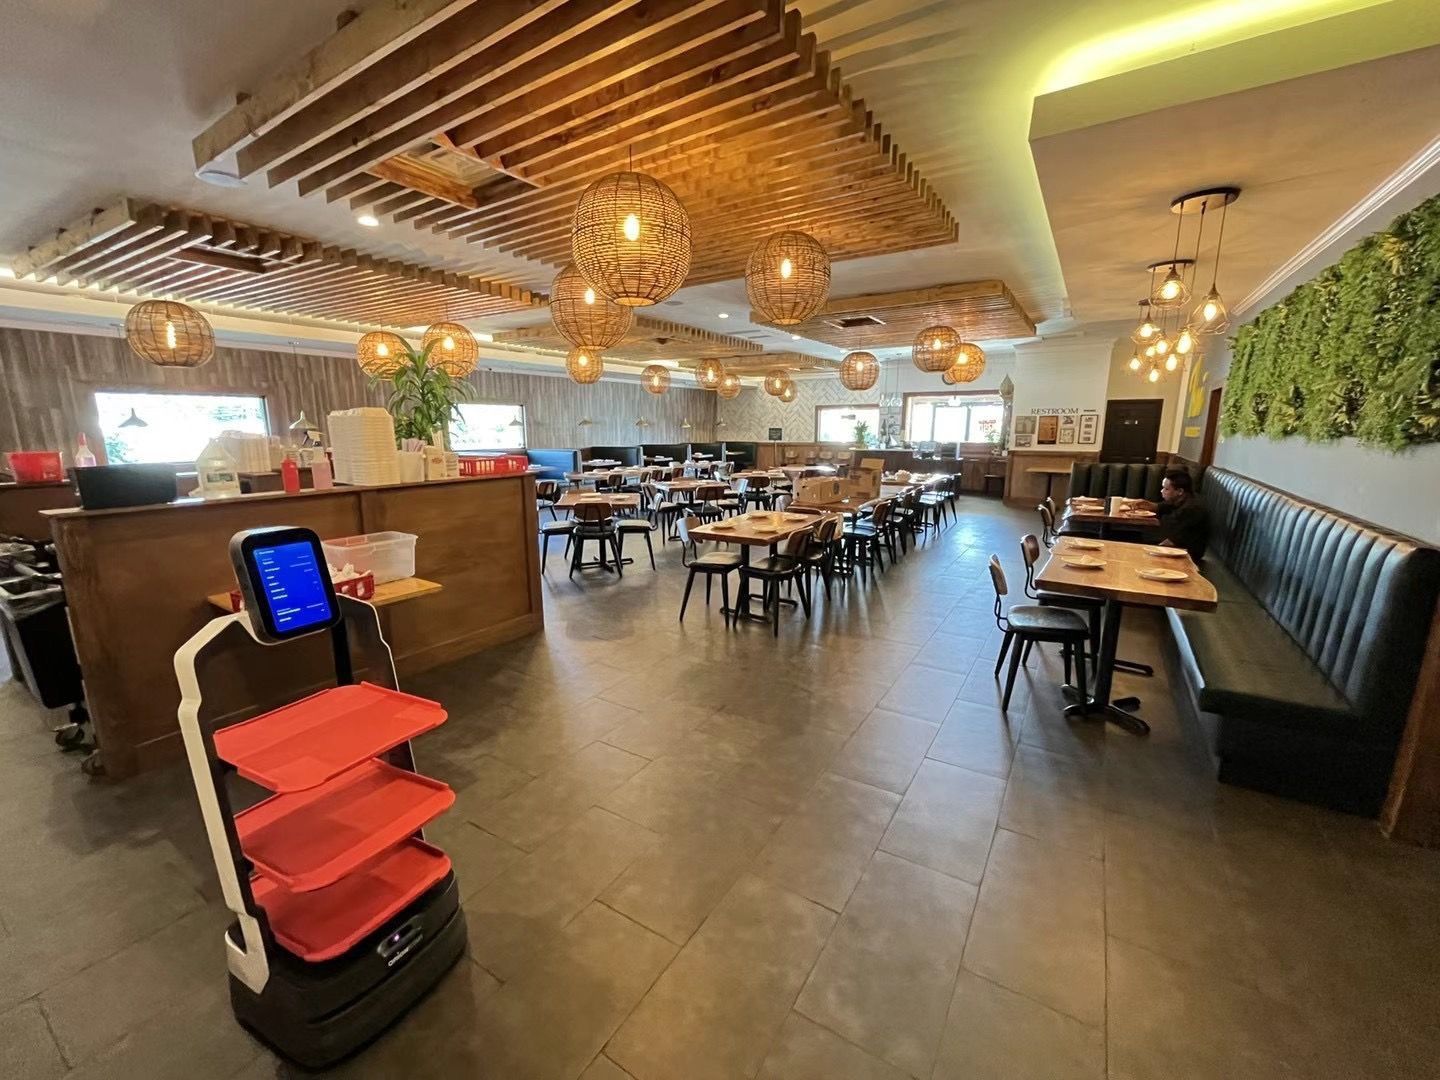 How Thai Norcross uses multiple robots in their restaurant